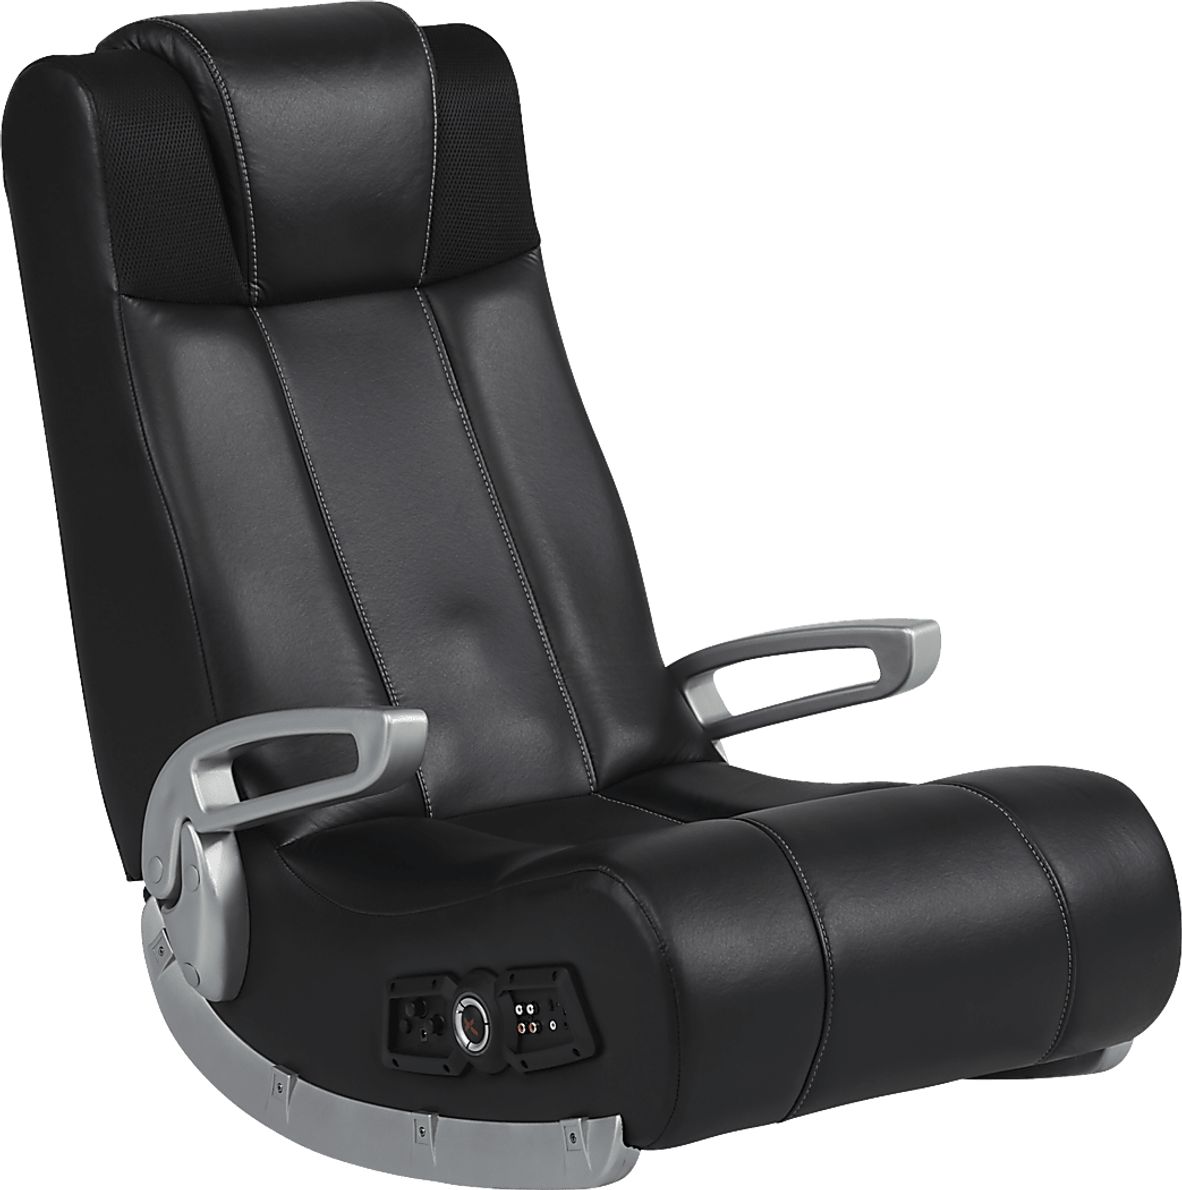 x Rocker Deluxe Executive Office Chair with Sound, Black